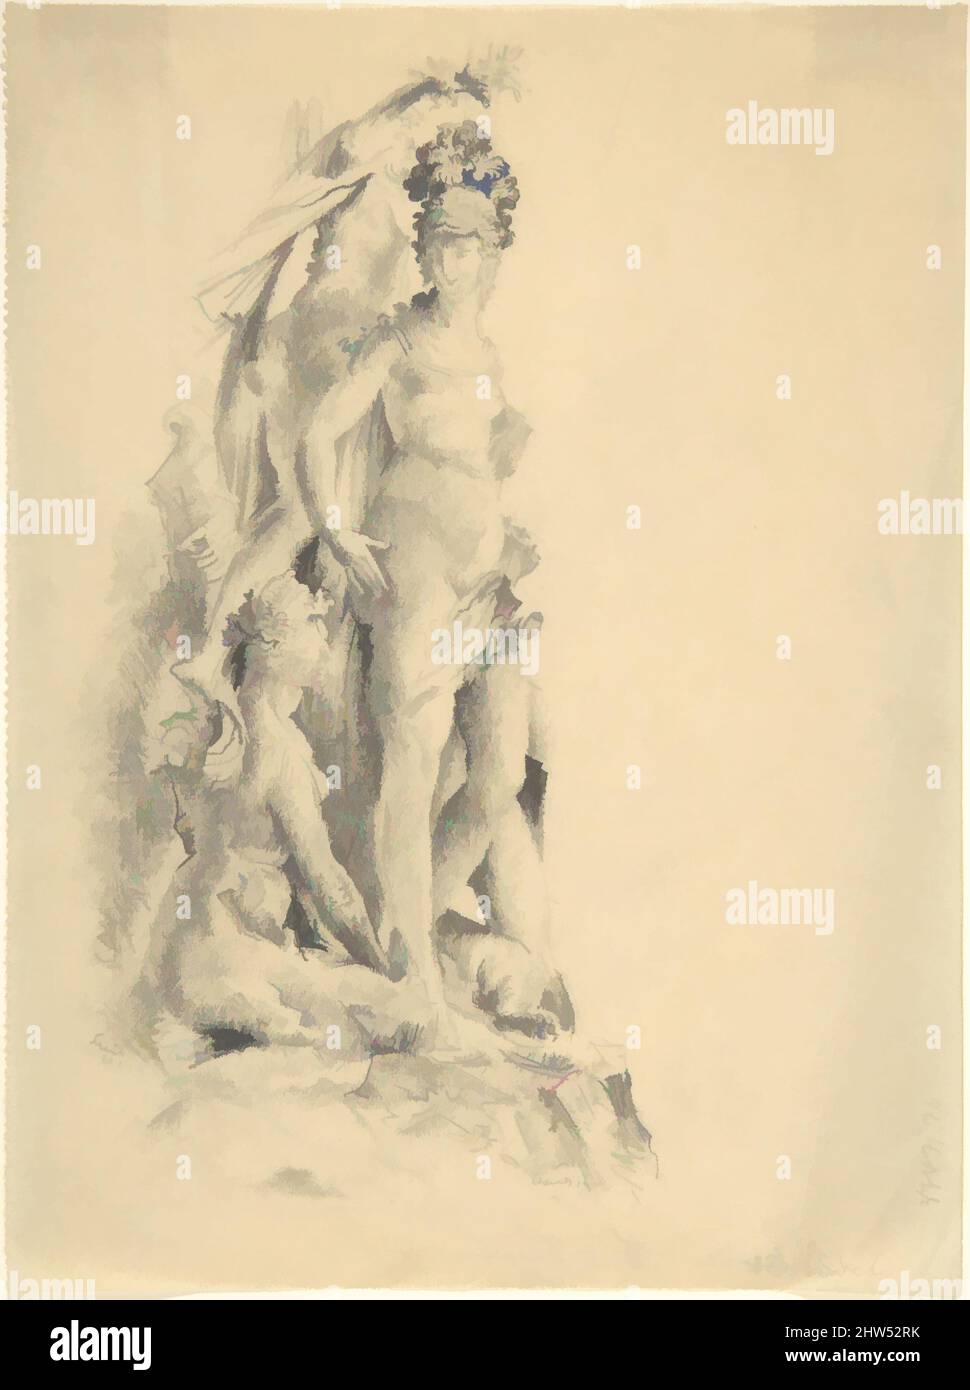 Art inspired by The Triumph of Minerva (?), early 20th–mid 20th century, Graphite., 8 1/16 x 6 in. (20.5 x 15.2 cm); left margin perforated, Drawings, Paul Scheurich (American German, New York 1883–1945 Brandenburg, Classic works modernized by Artotop with a splash of modernity. Shapes, color and value, eye-catching visual impact on art. Emotions through freedom of artworks in a contemporary way. A timeless message pursuing a wildly creative new direction. Artists turning to the digital medium and creating the Artotop NFT Stock Photo